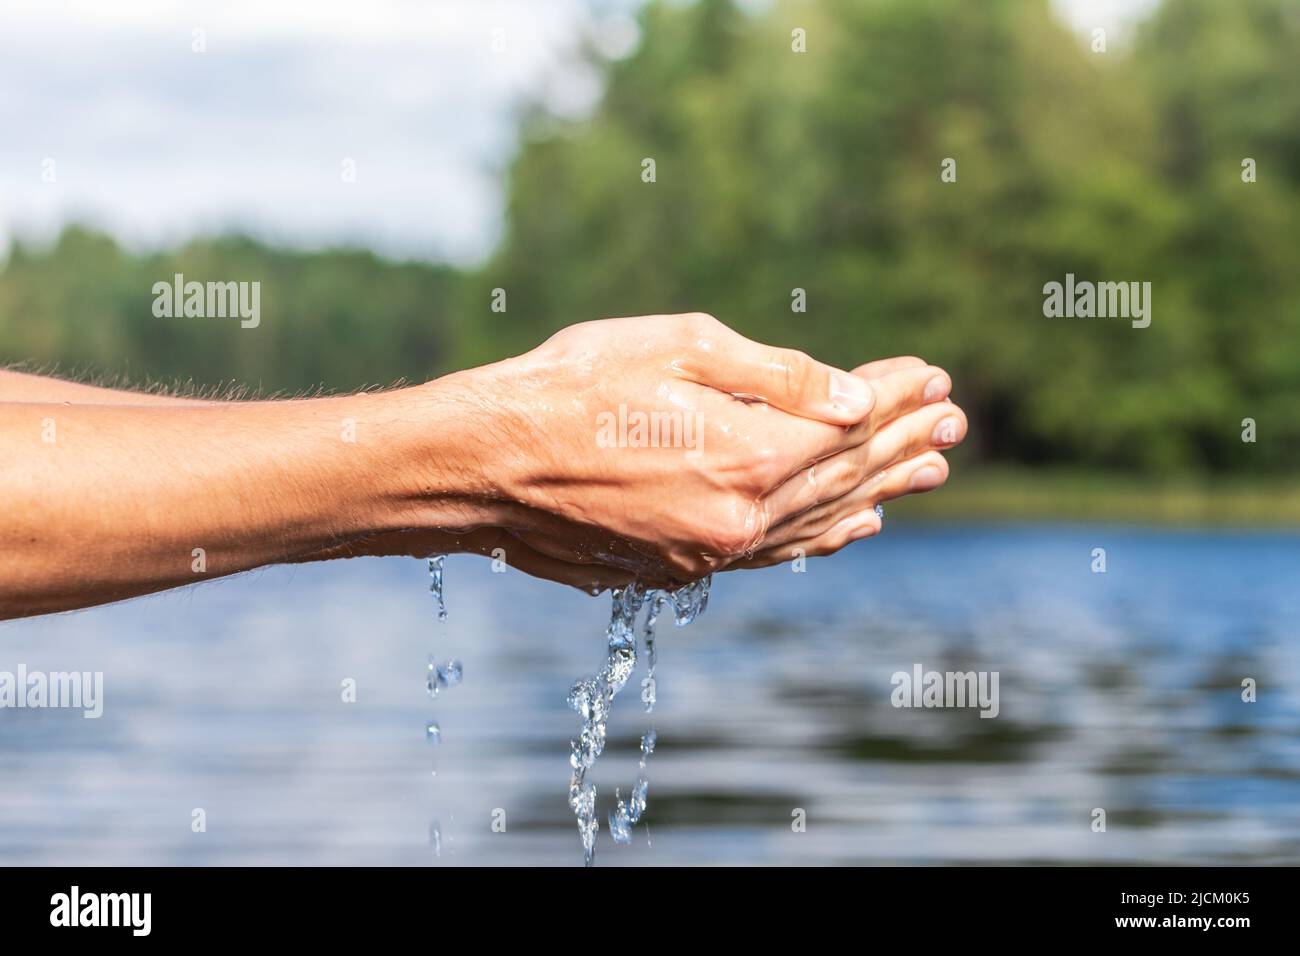 Person scoops up raw water from a lake. Natural water resources environmental awareness concept Stock Photo